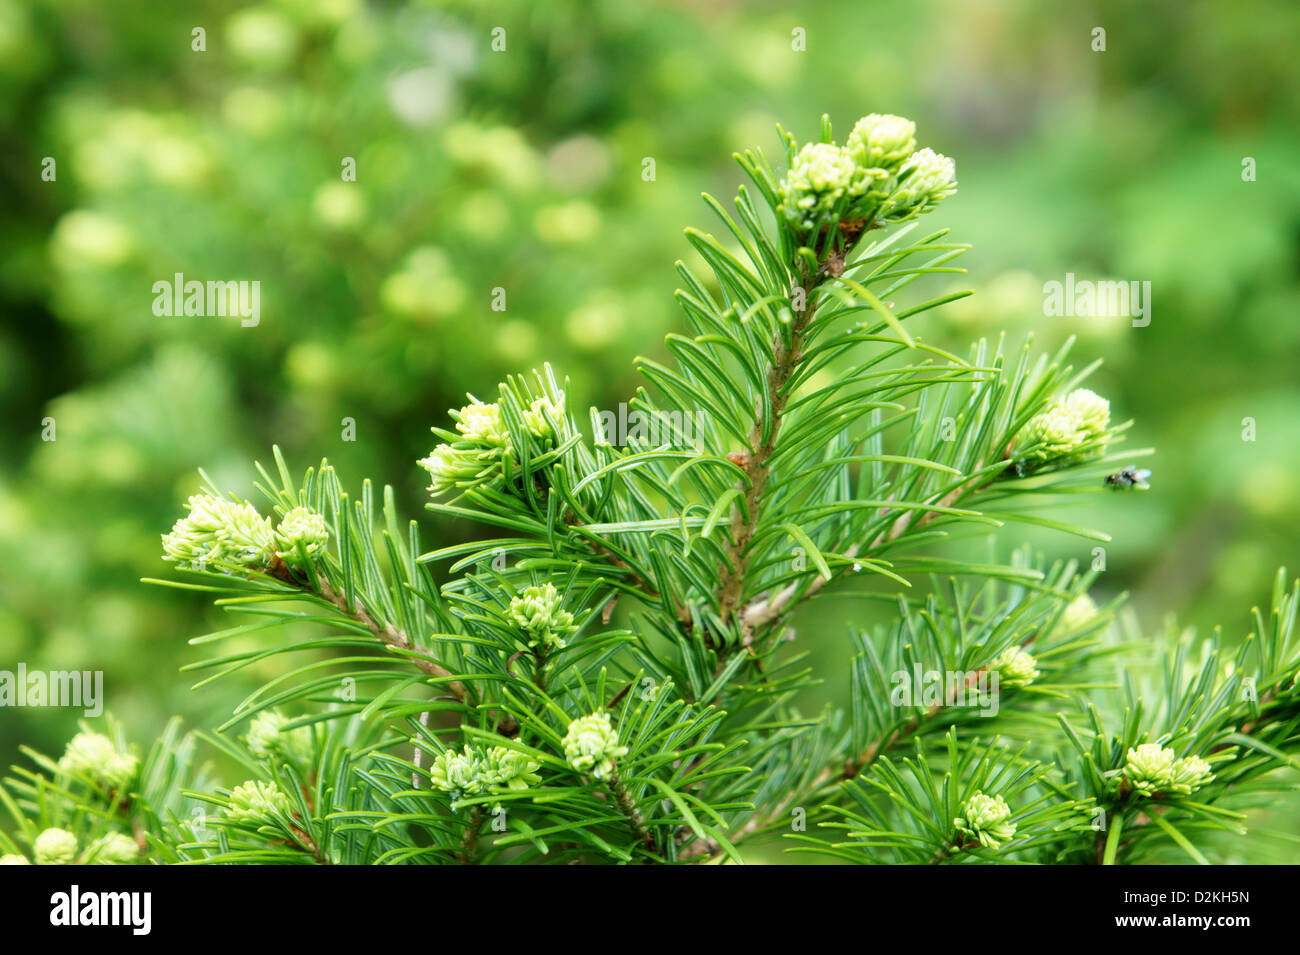 Young green branch of Christmas tree in natural light on a nature background. Stock Photo